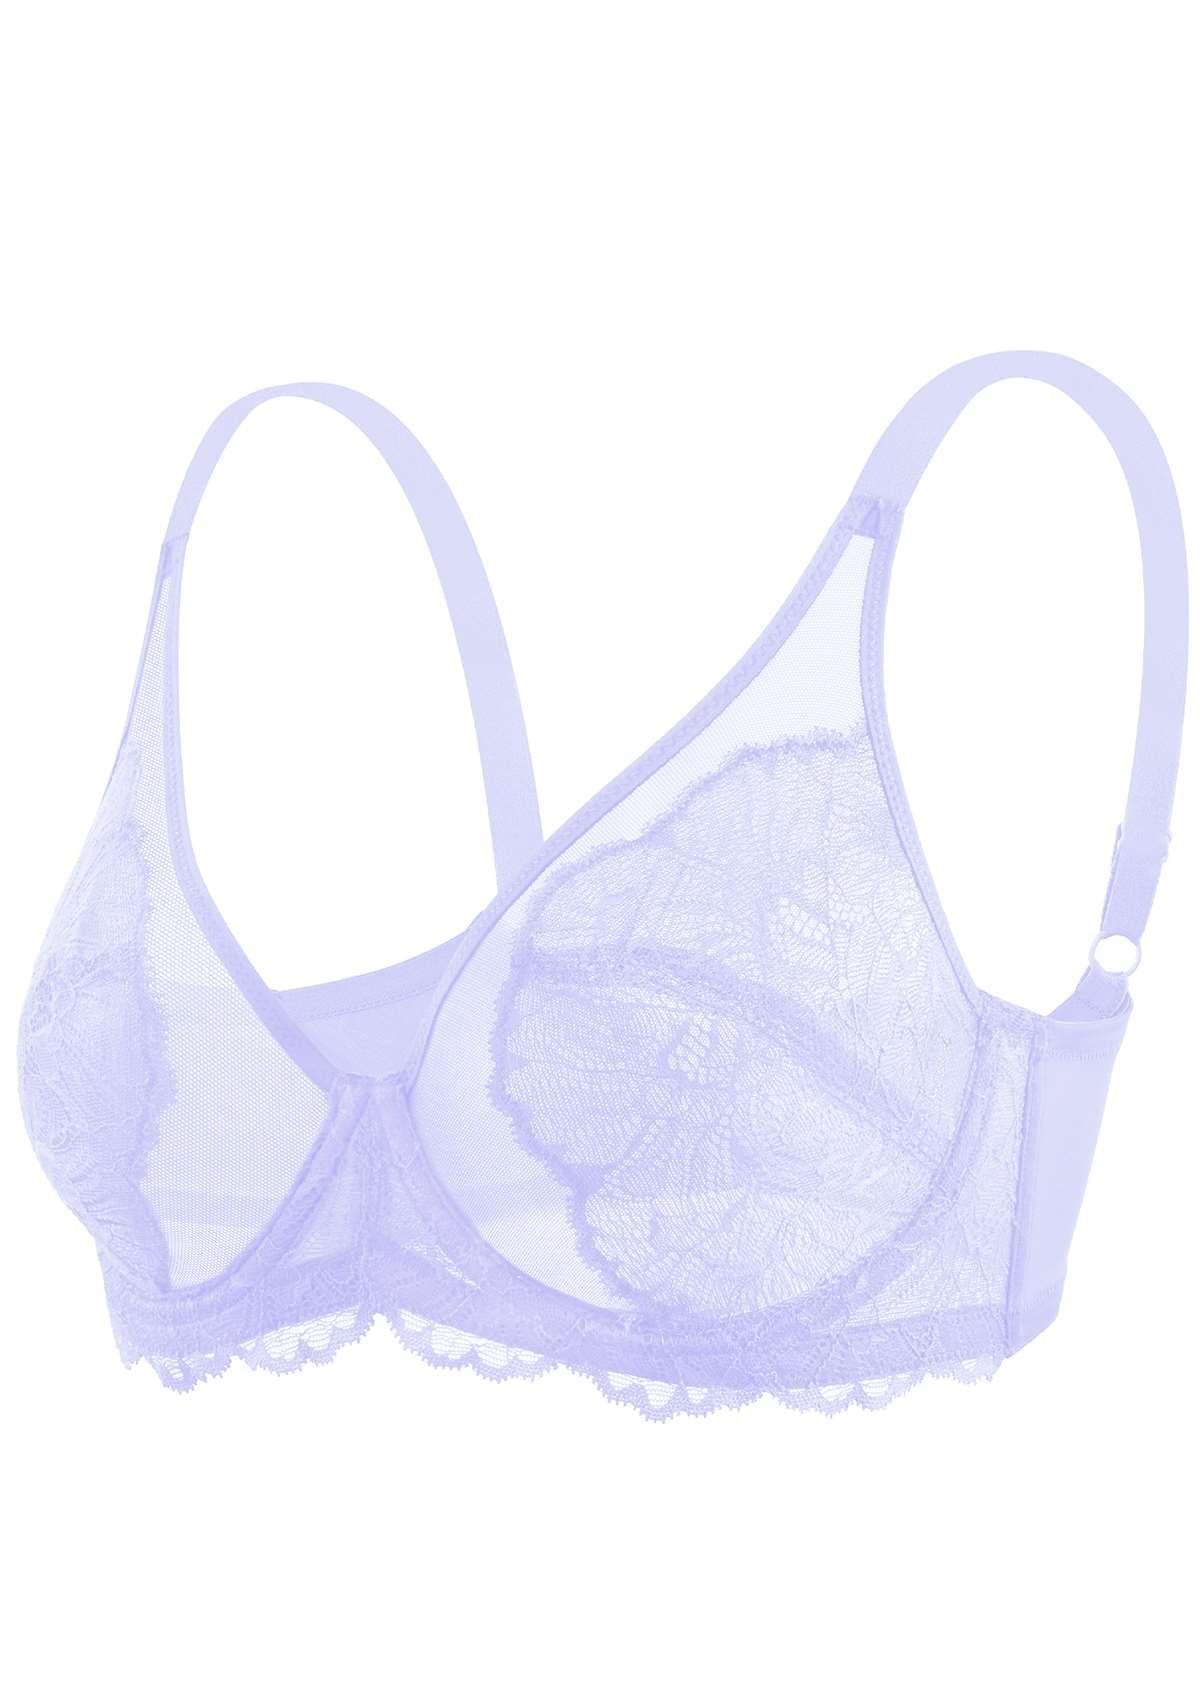 HSIA Blossom Transparent Lace Bra: Plus Size Wired Back Smoothing Bra - Light Purple / 38 / G